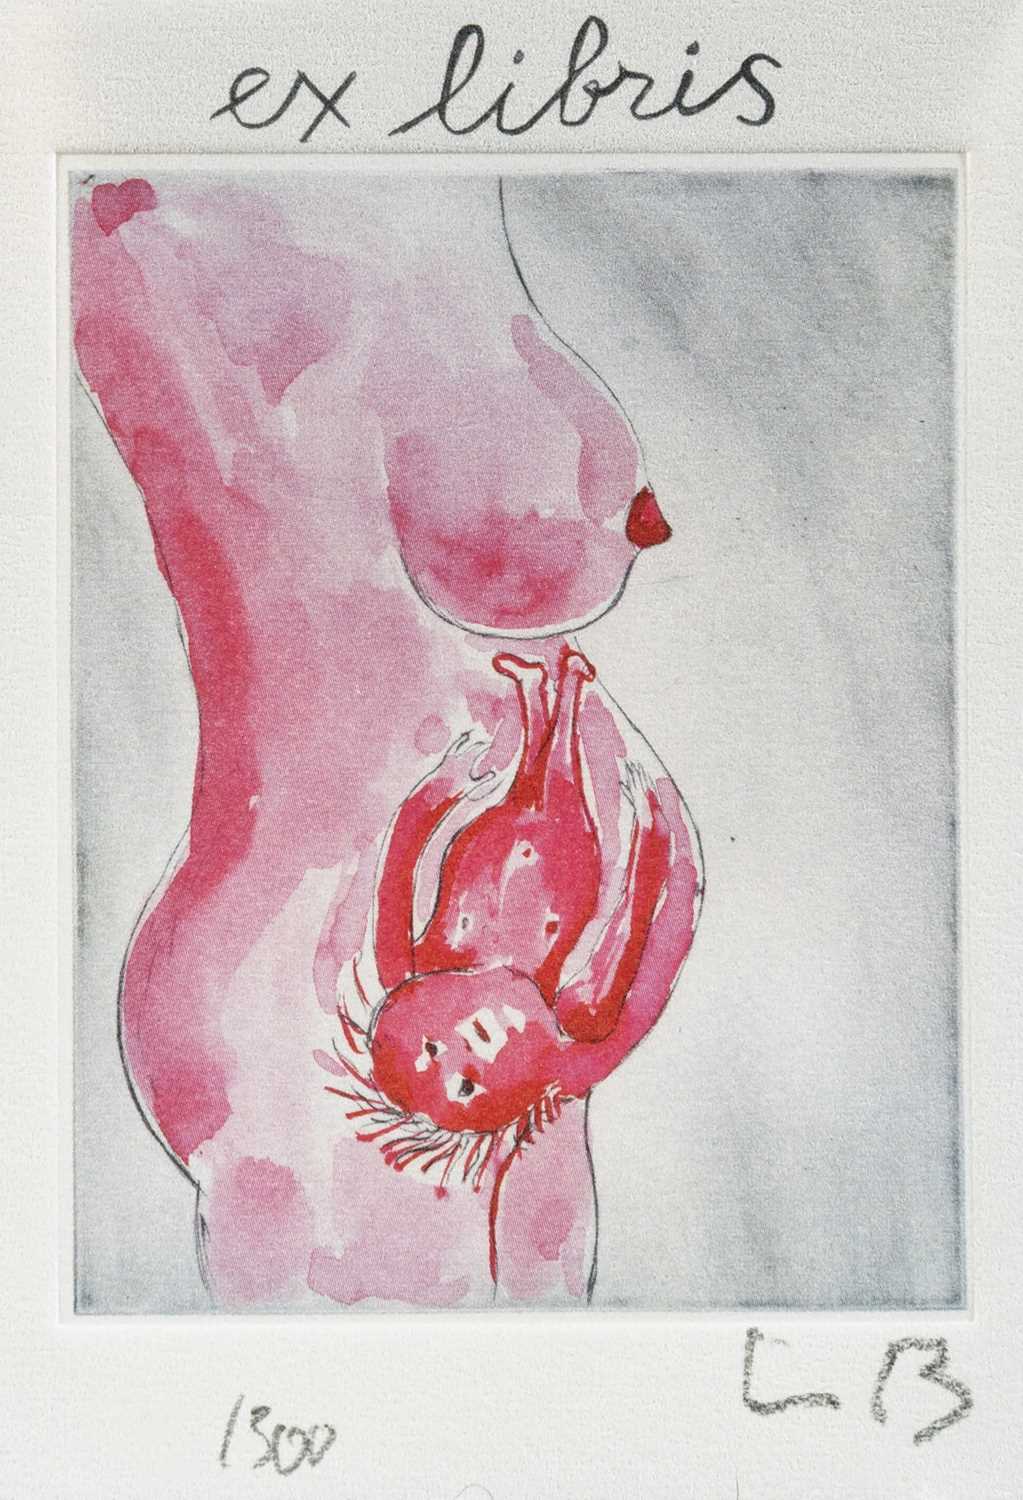 Lot 72 - Louise Bourgeois (French 1911-2010), 'Ex Libris', 2005